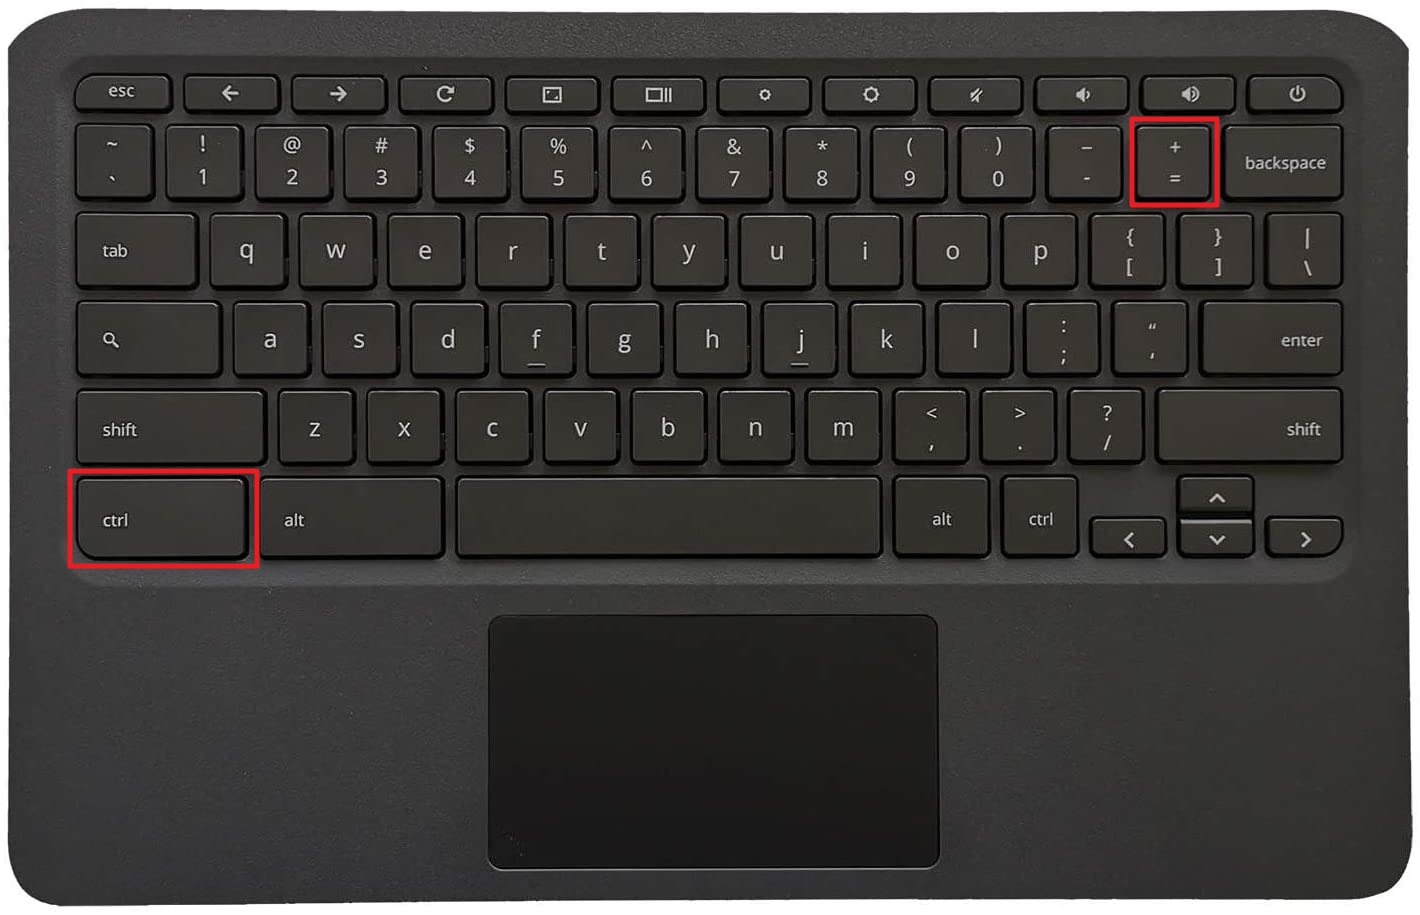 Zoom in keyboard shortcut - 3 Ways to Zoom In and Out Chromebook Screen 5